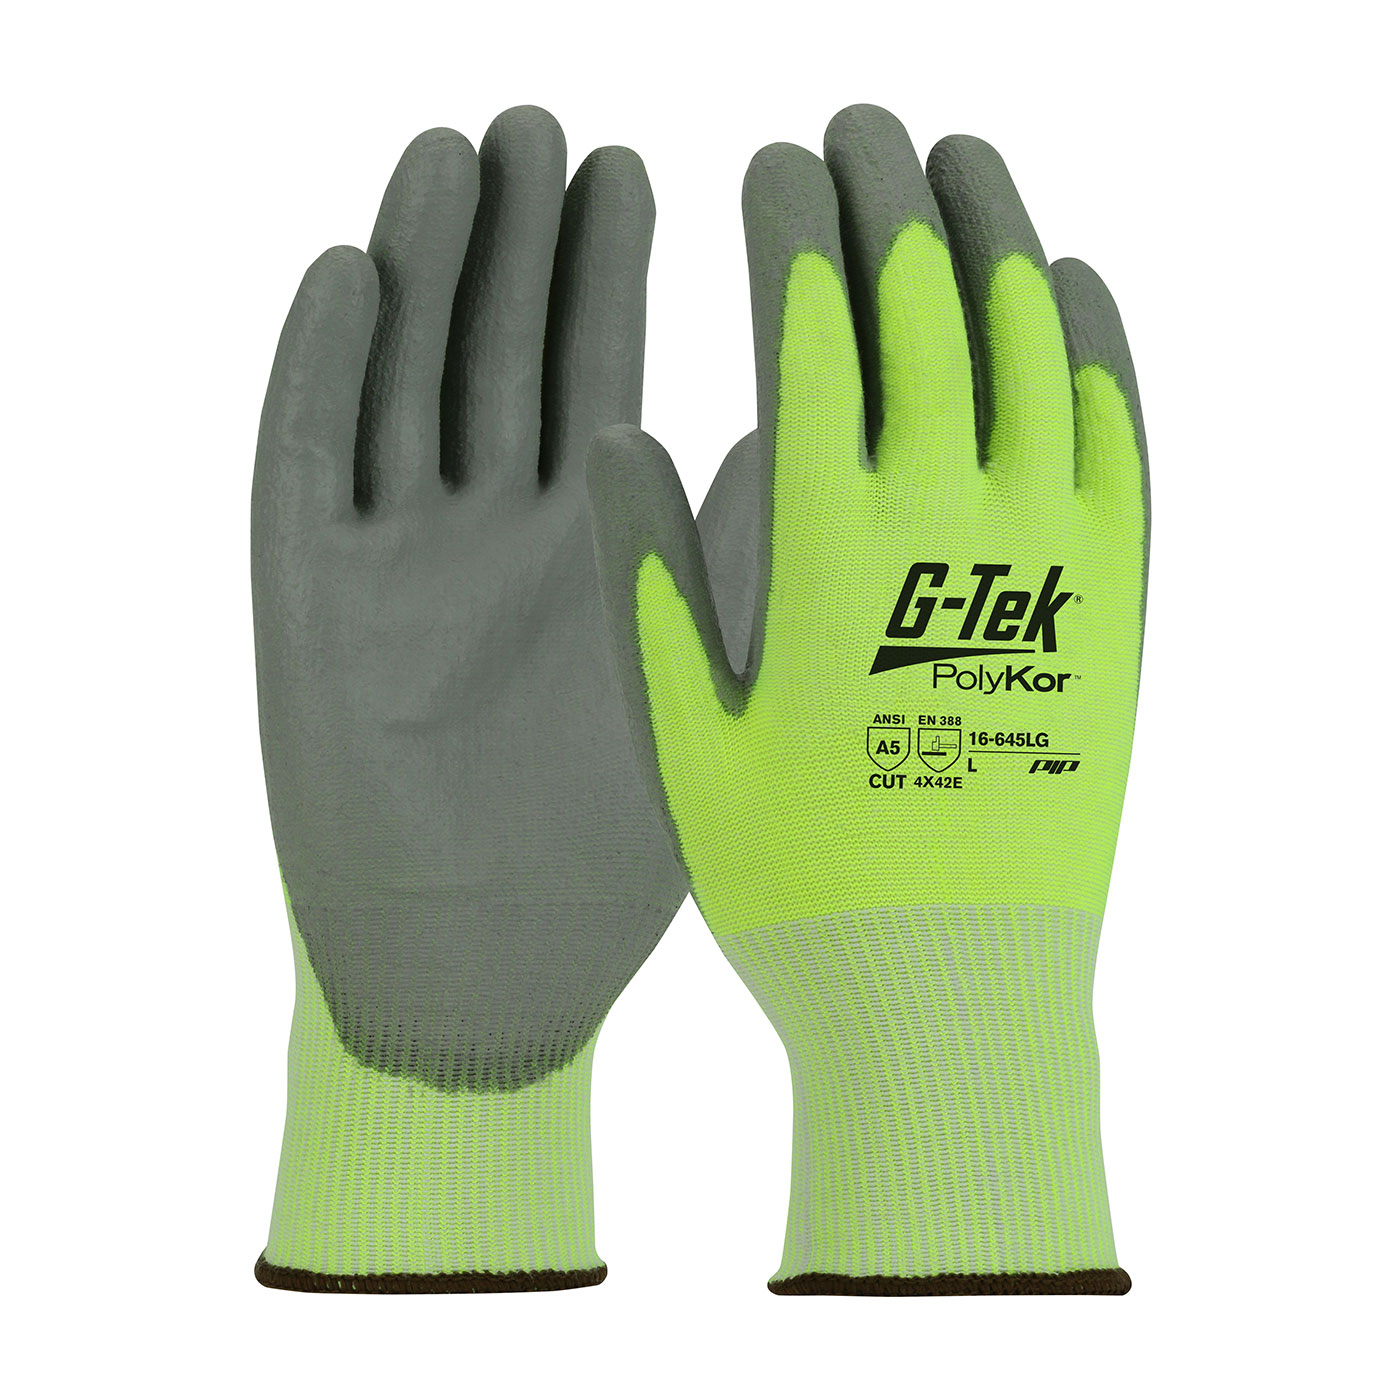 PIP 16-645LG/L G-Tek PolyKor Seamless Knit PolyKor Blended Glove with Polyurethane Coated Smooth Grip on Palm & Fingers - Large PID-16645LGL